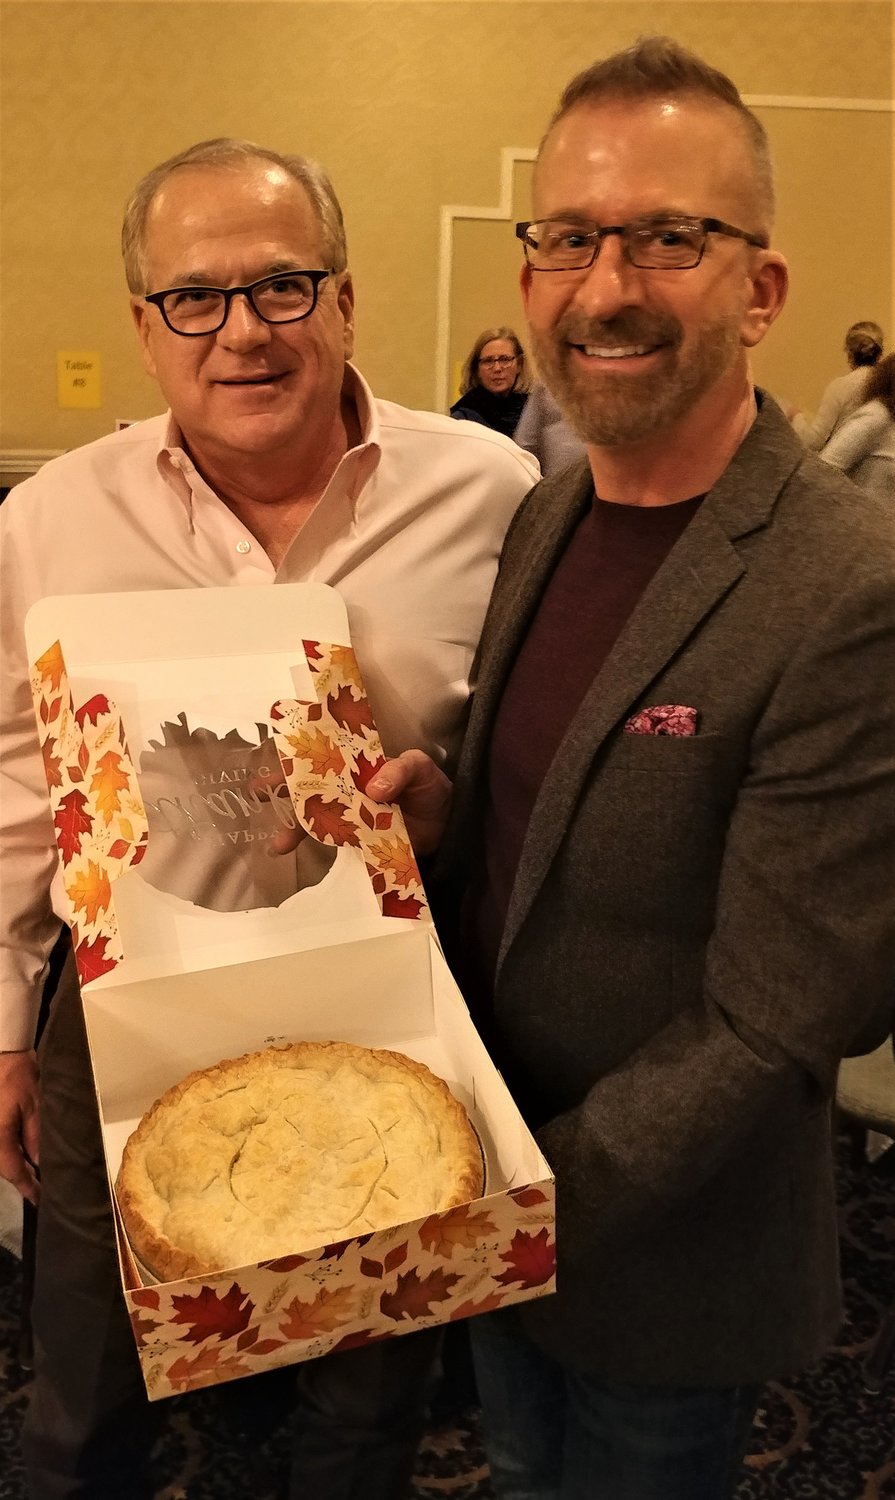 Las Cruces dentists Phil Born, left, and Brian Gilbert, each bid $500 to share in a homemade apple pie won during a live auction at the Nov. 15 PFLAG-Las Cruces fundraising gala. The pie was made by former PFLAG-Las Cruces President Merlyn Risser.